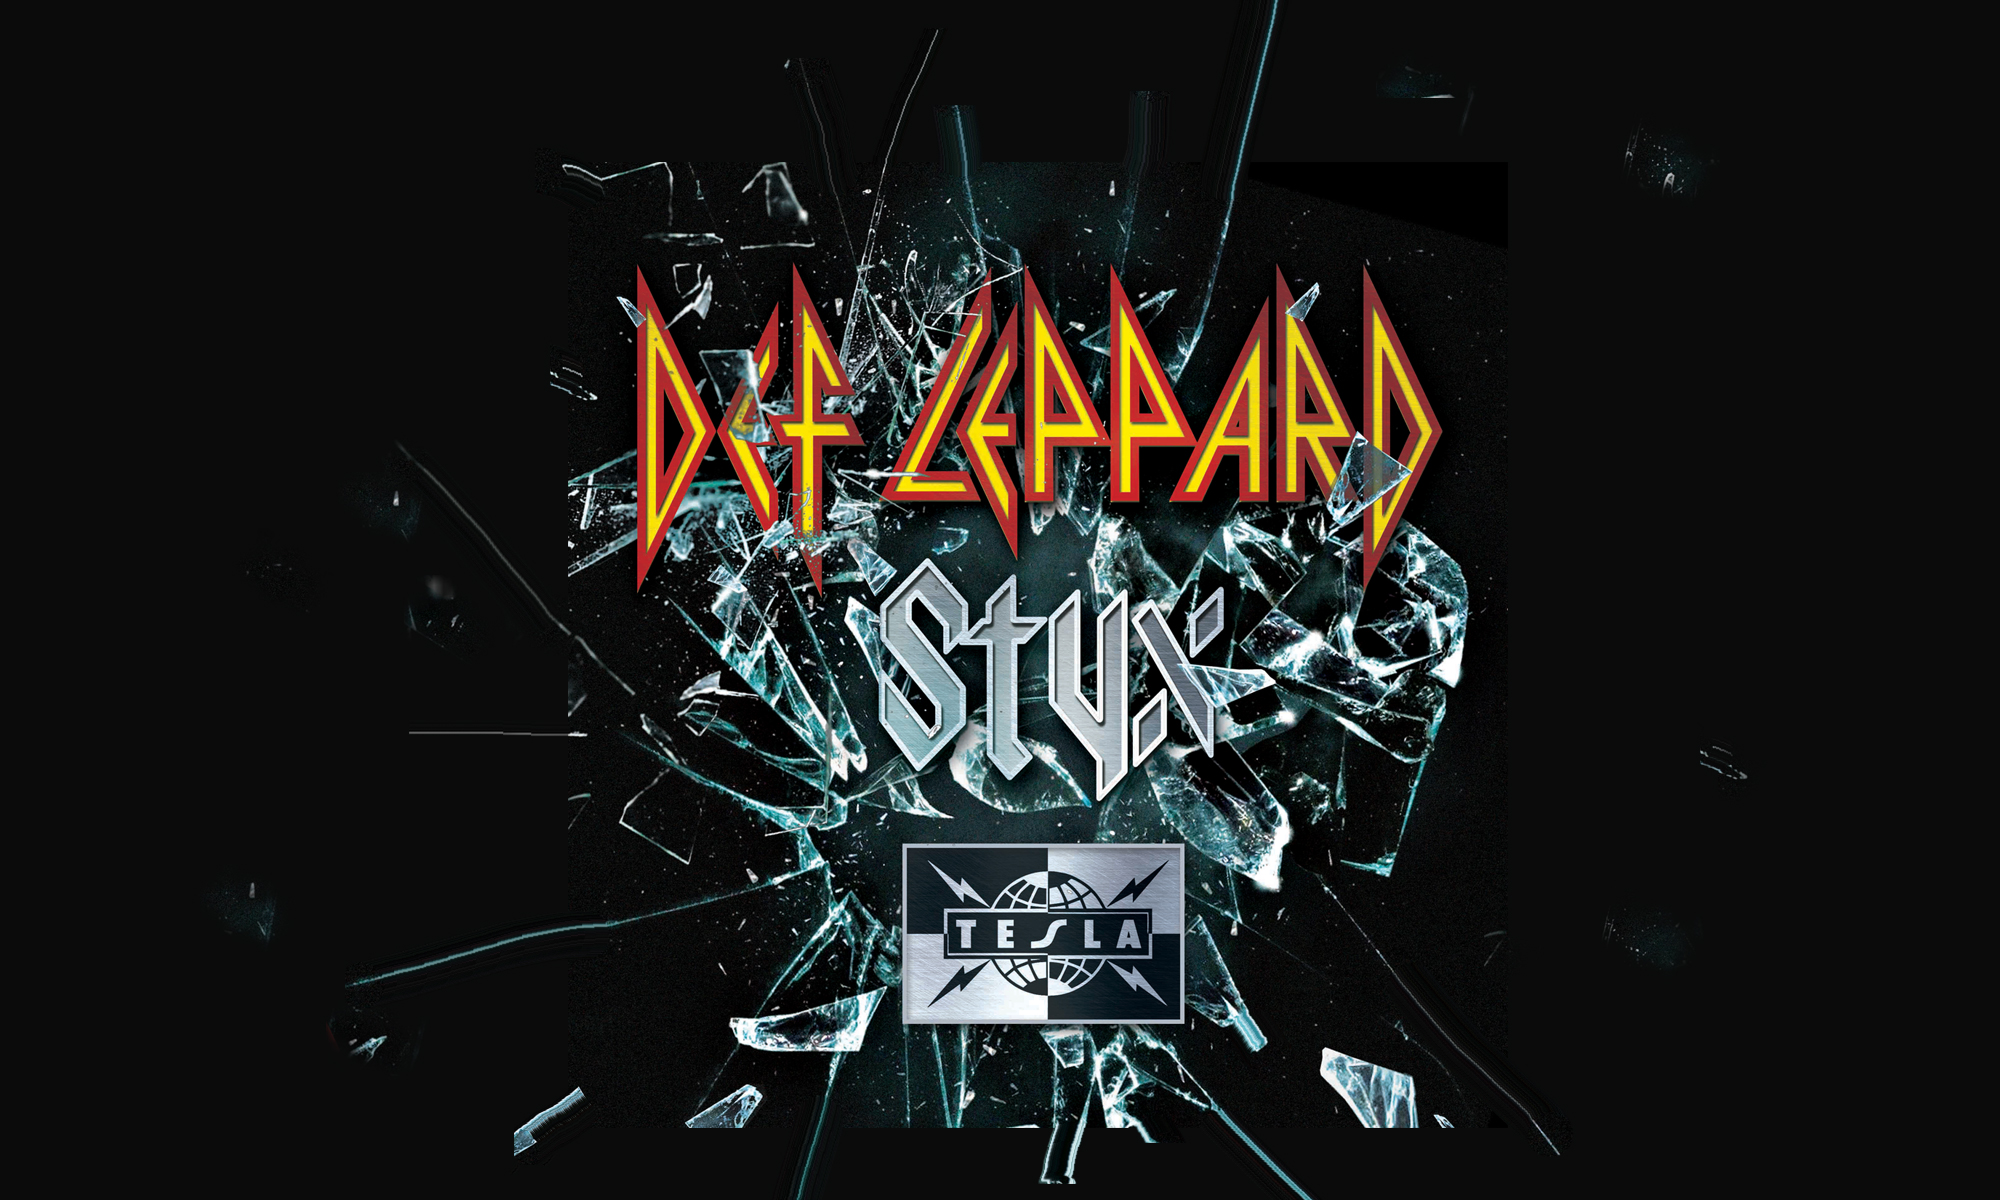 Double Days for Def Leppard - BOB 100.7